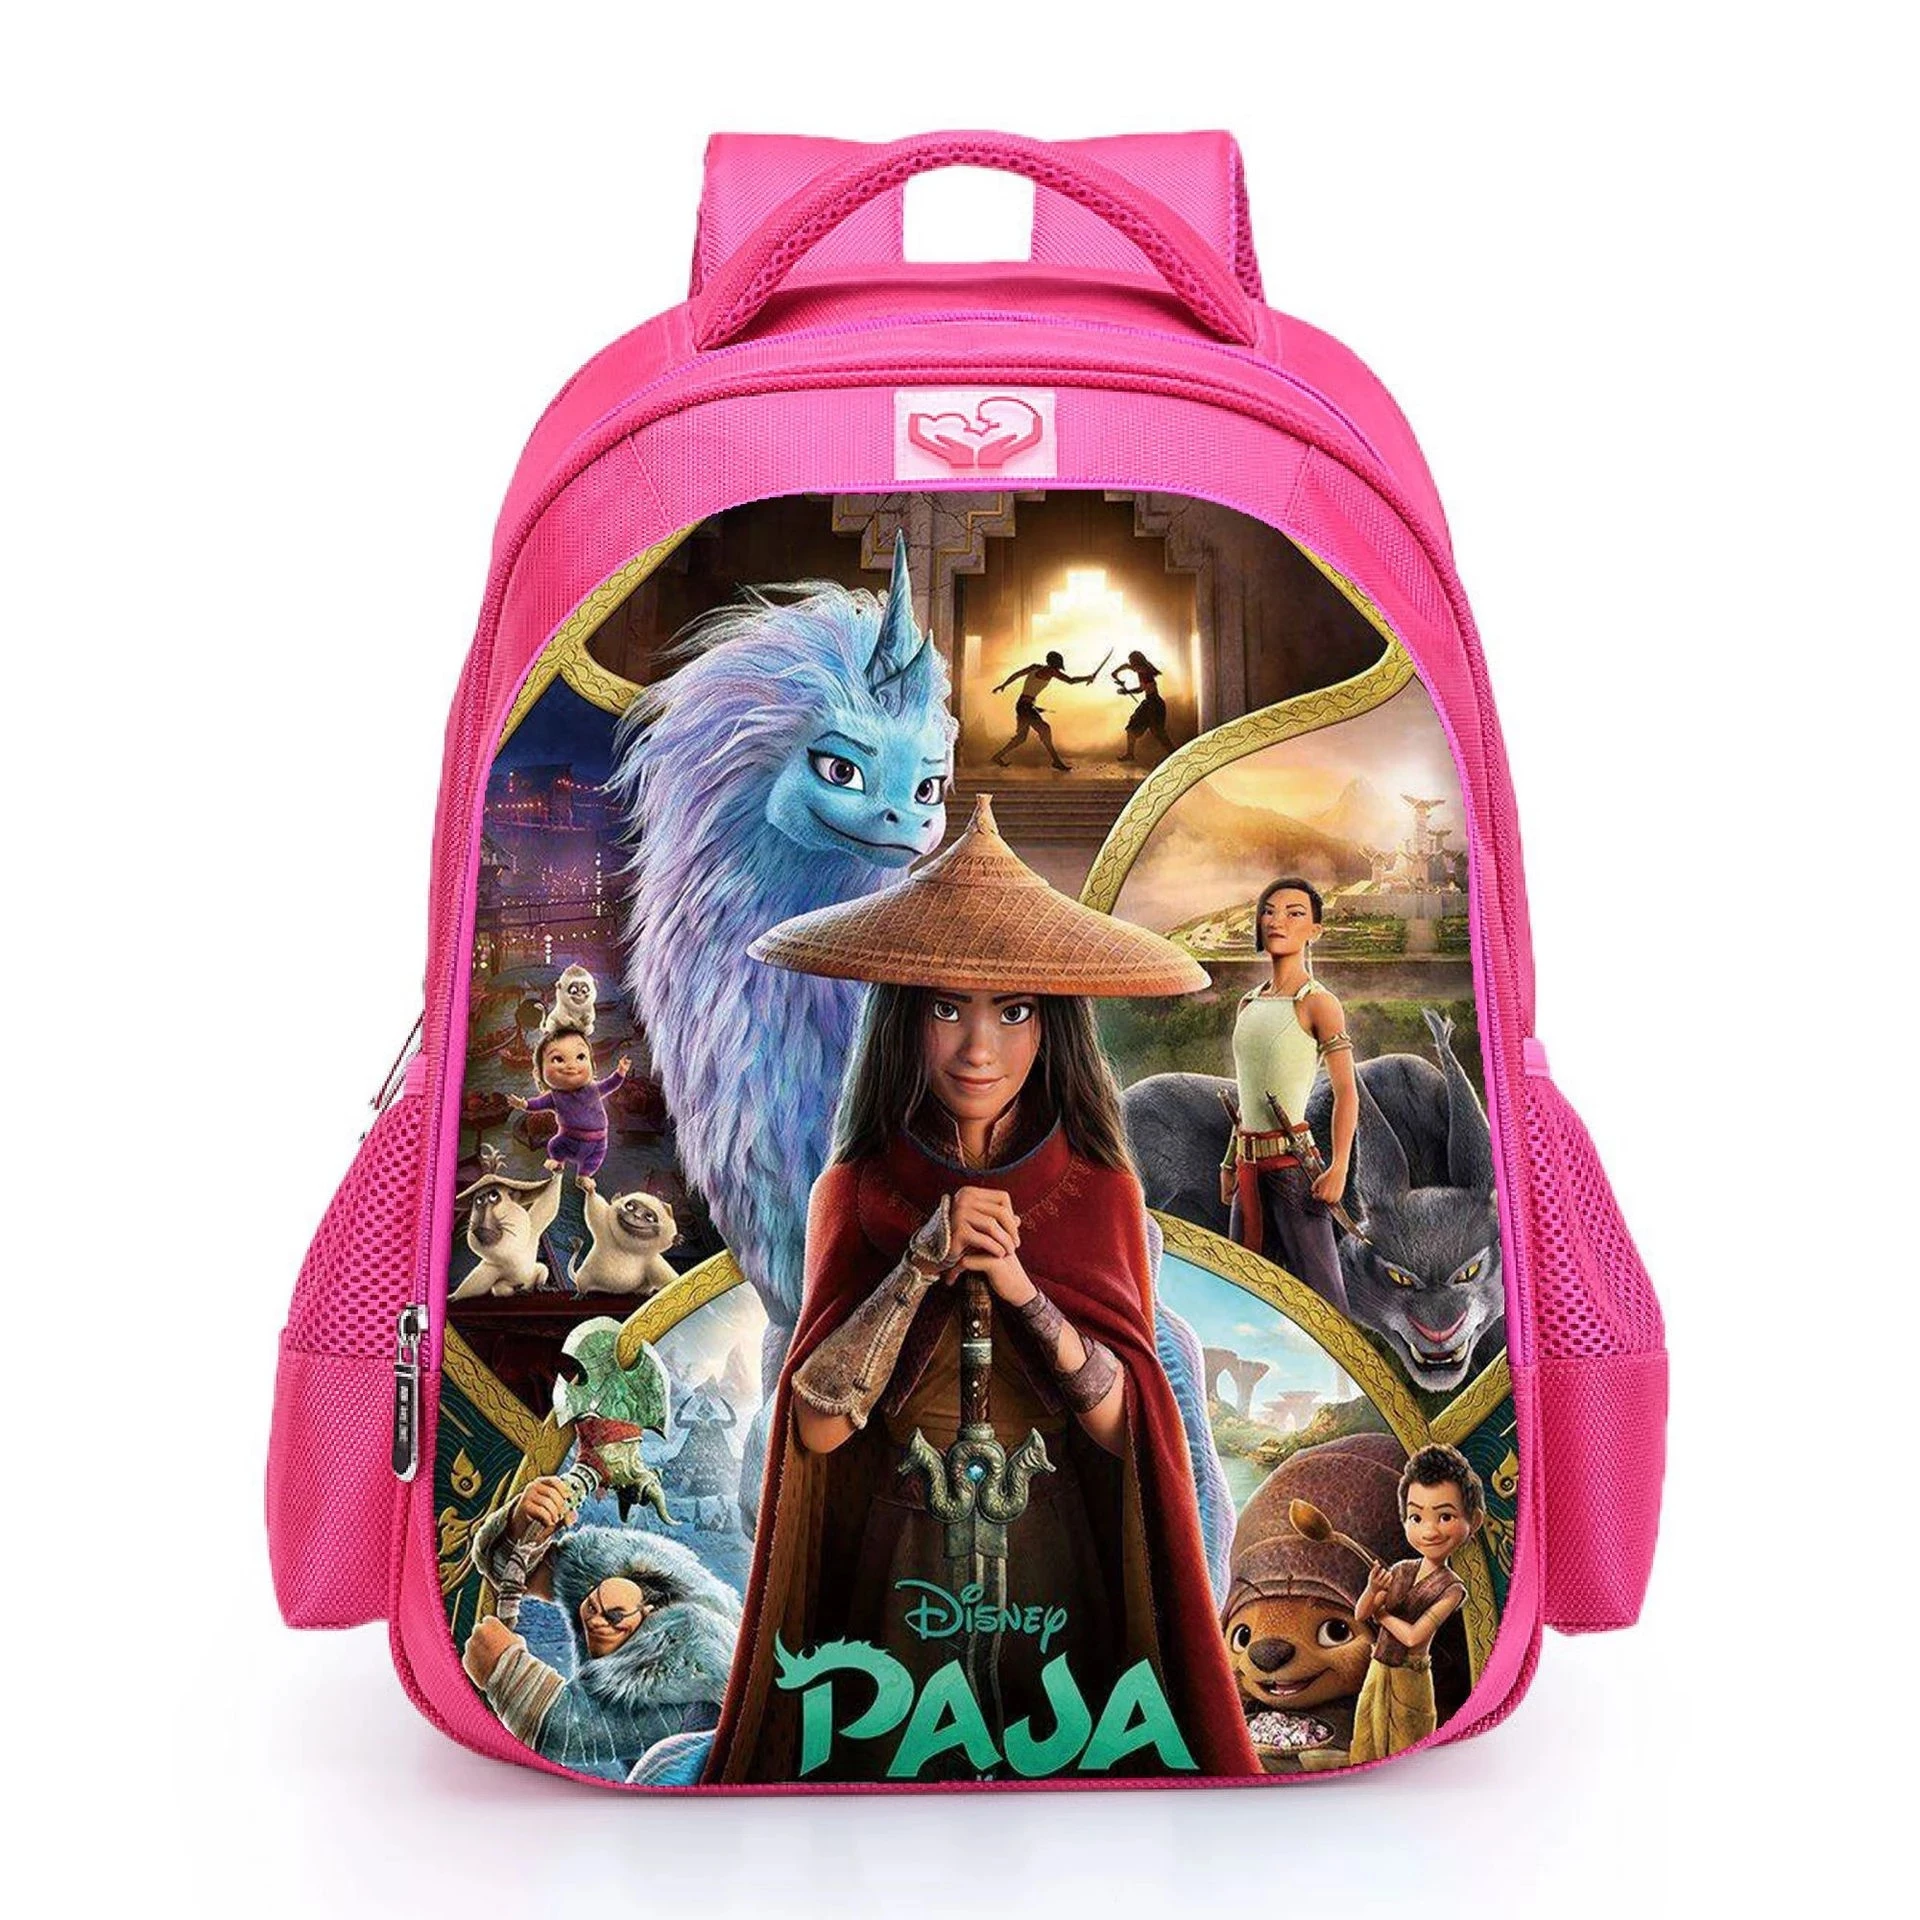 

Disney New Movie Raya And The Last Dragon Schoolbag Backpack Students' Burden Reduction Backpack Men And Women Travel Backpack